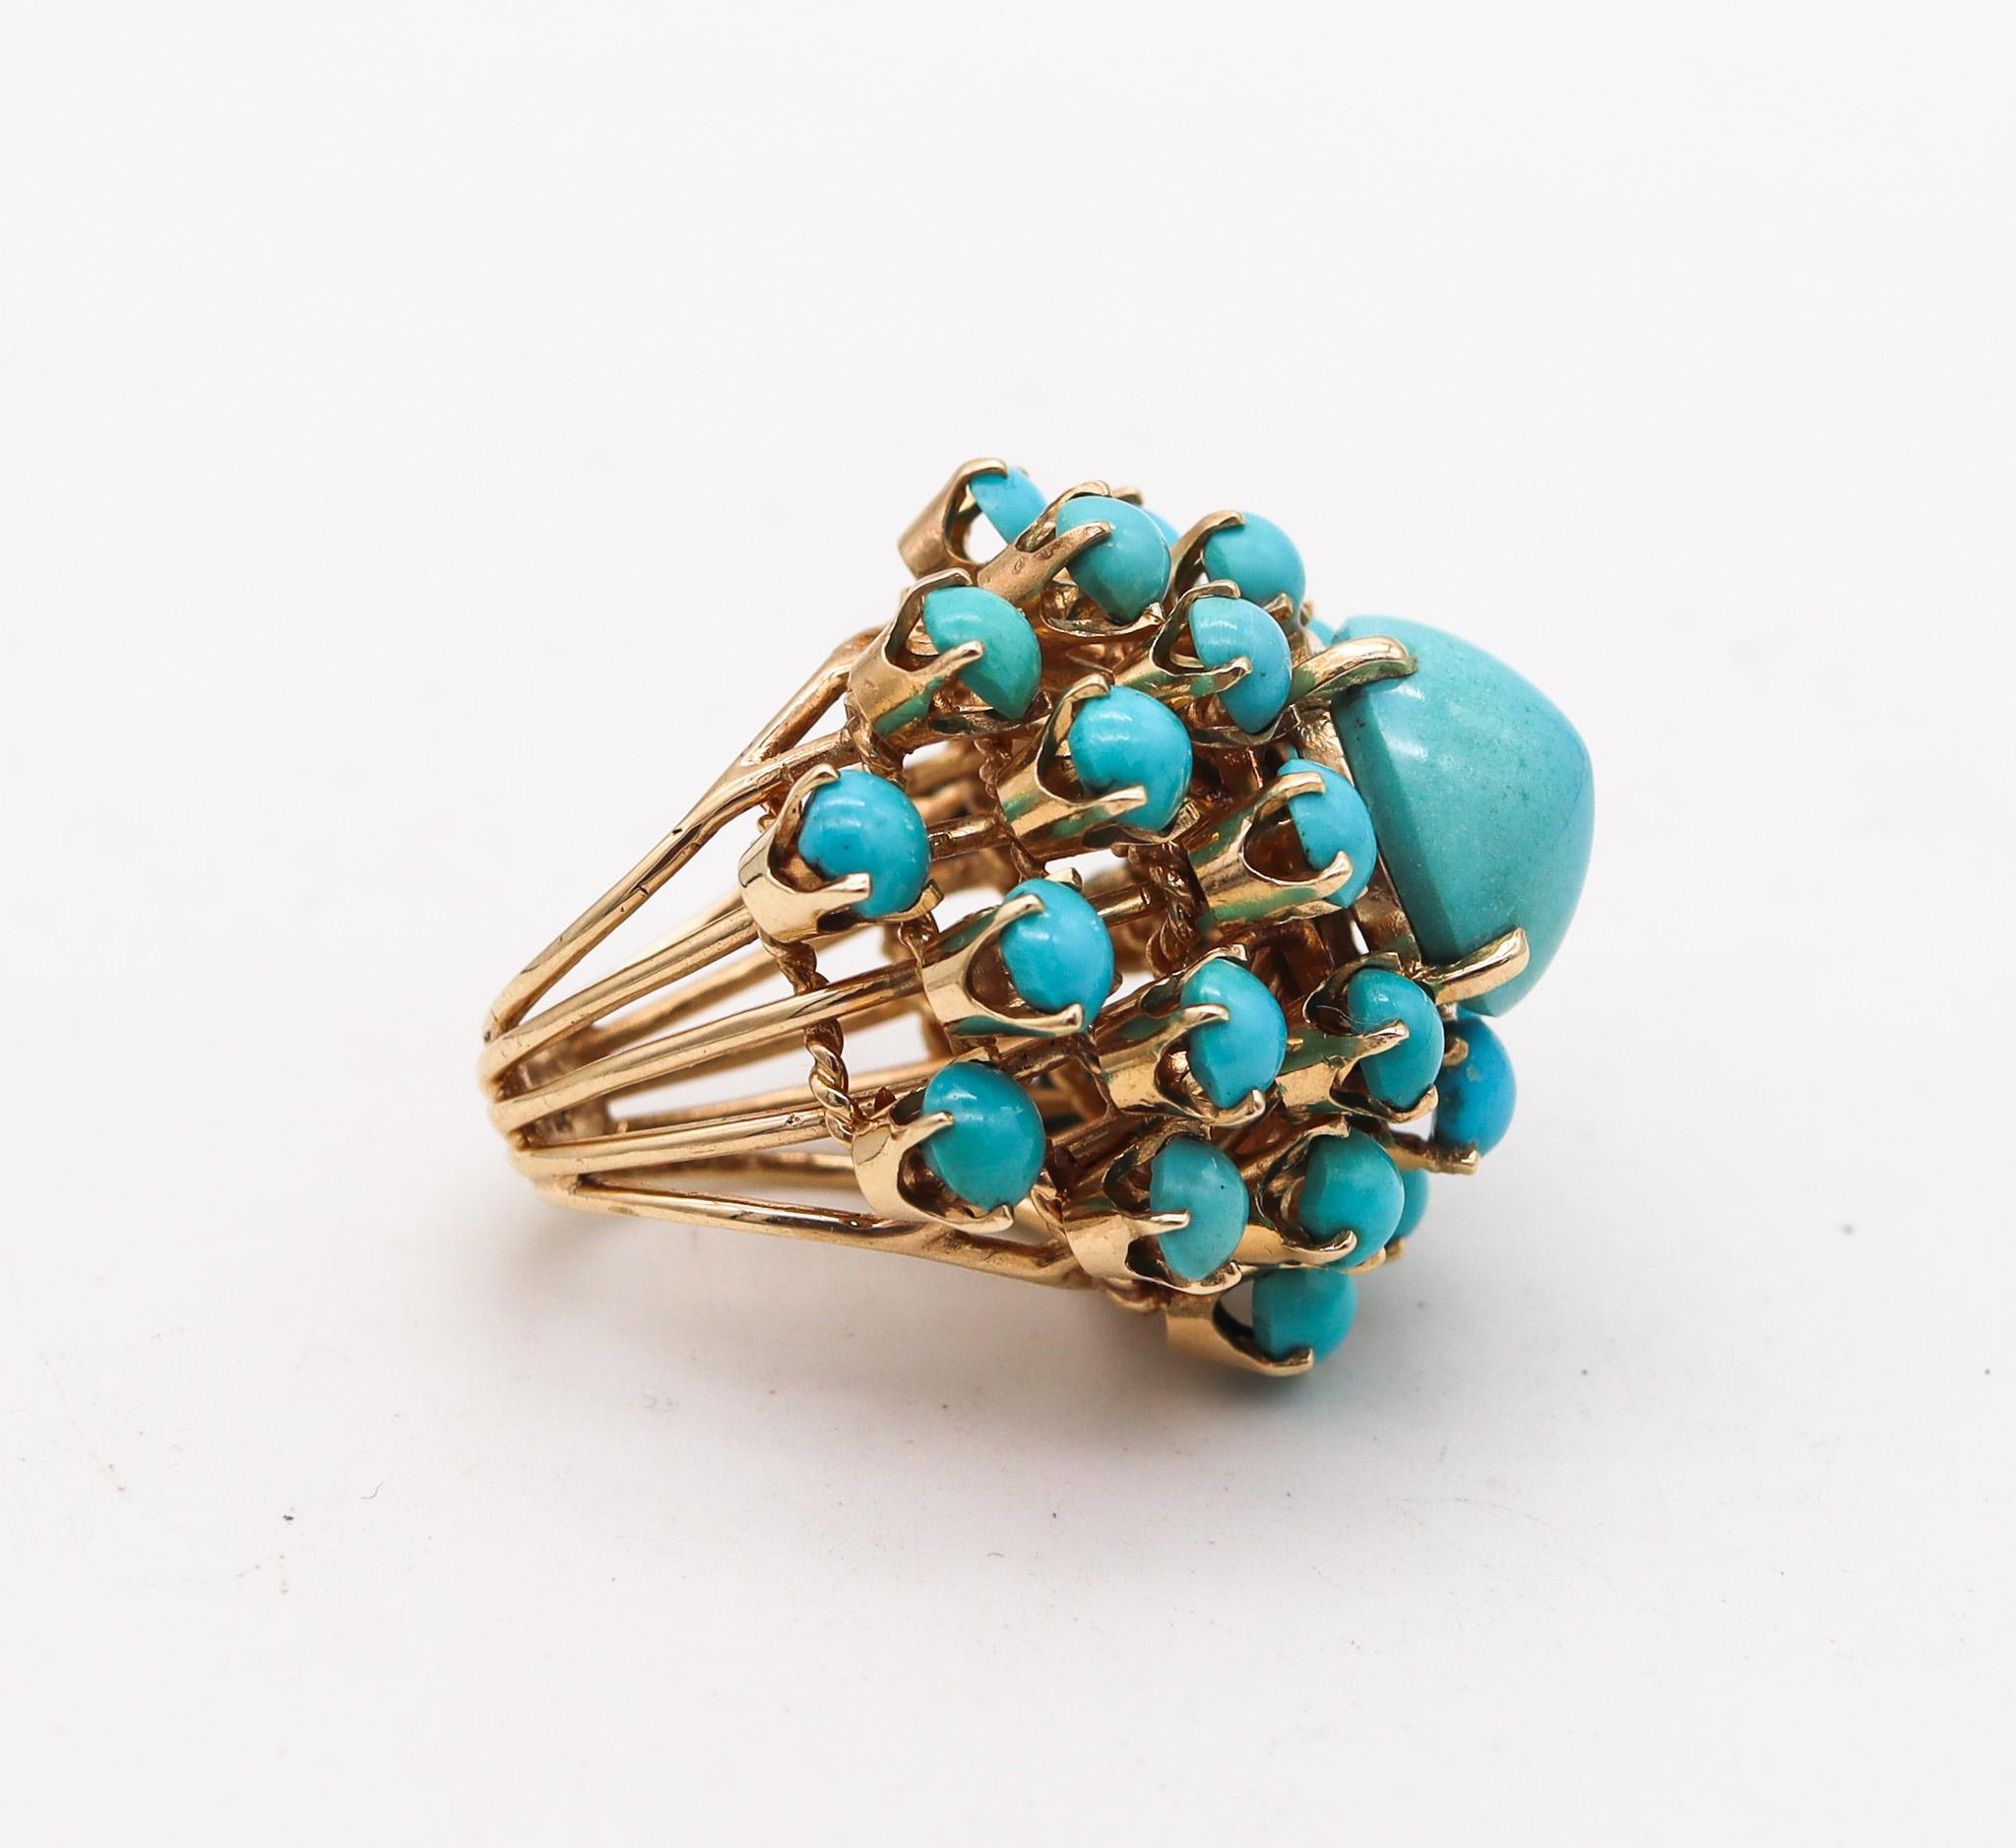 Cabochon Mid Century 1960 Modernist Cluster Ring In 14Kt Gold With 25.56 Ctw In Turquoise For Sale